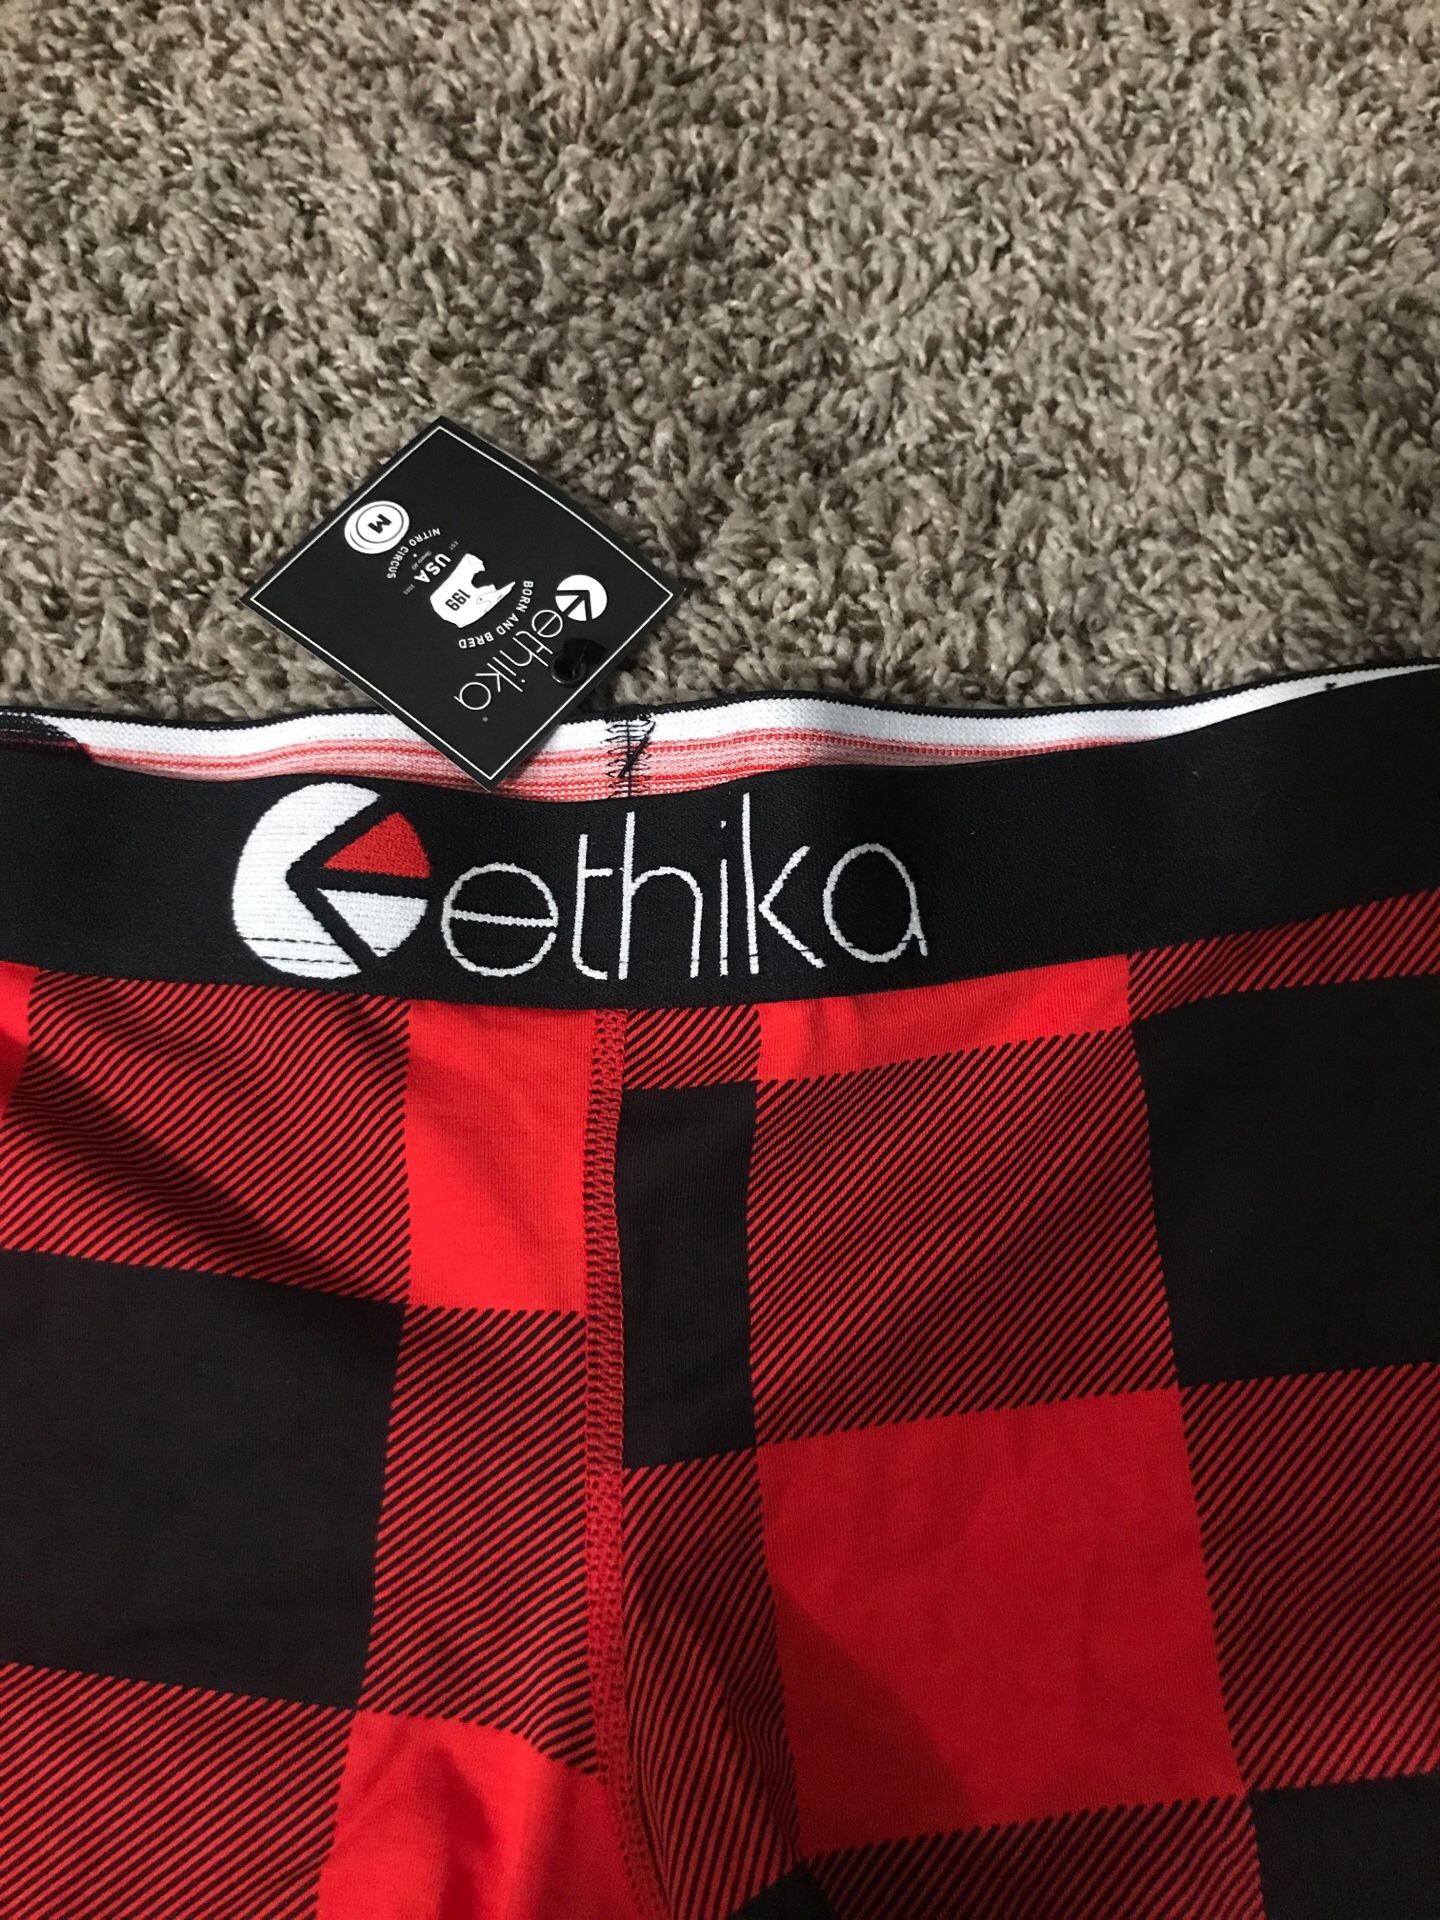 Ethika Red Plaid Staple for Sale in Phoenix, AZ - OfferUp